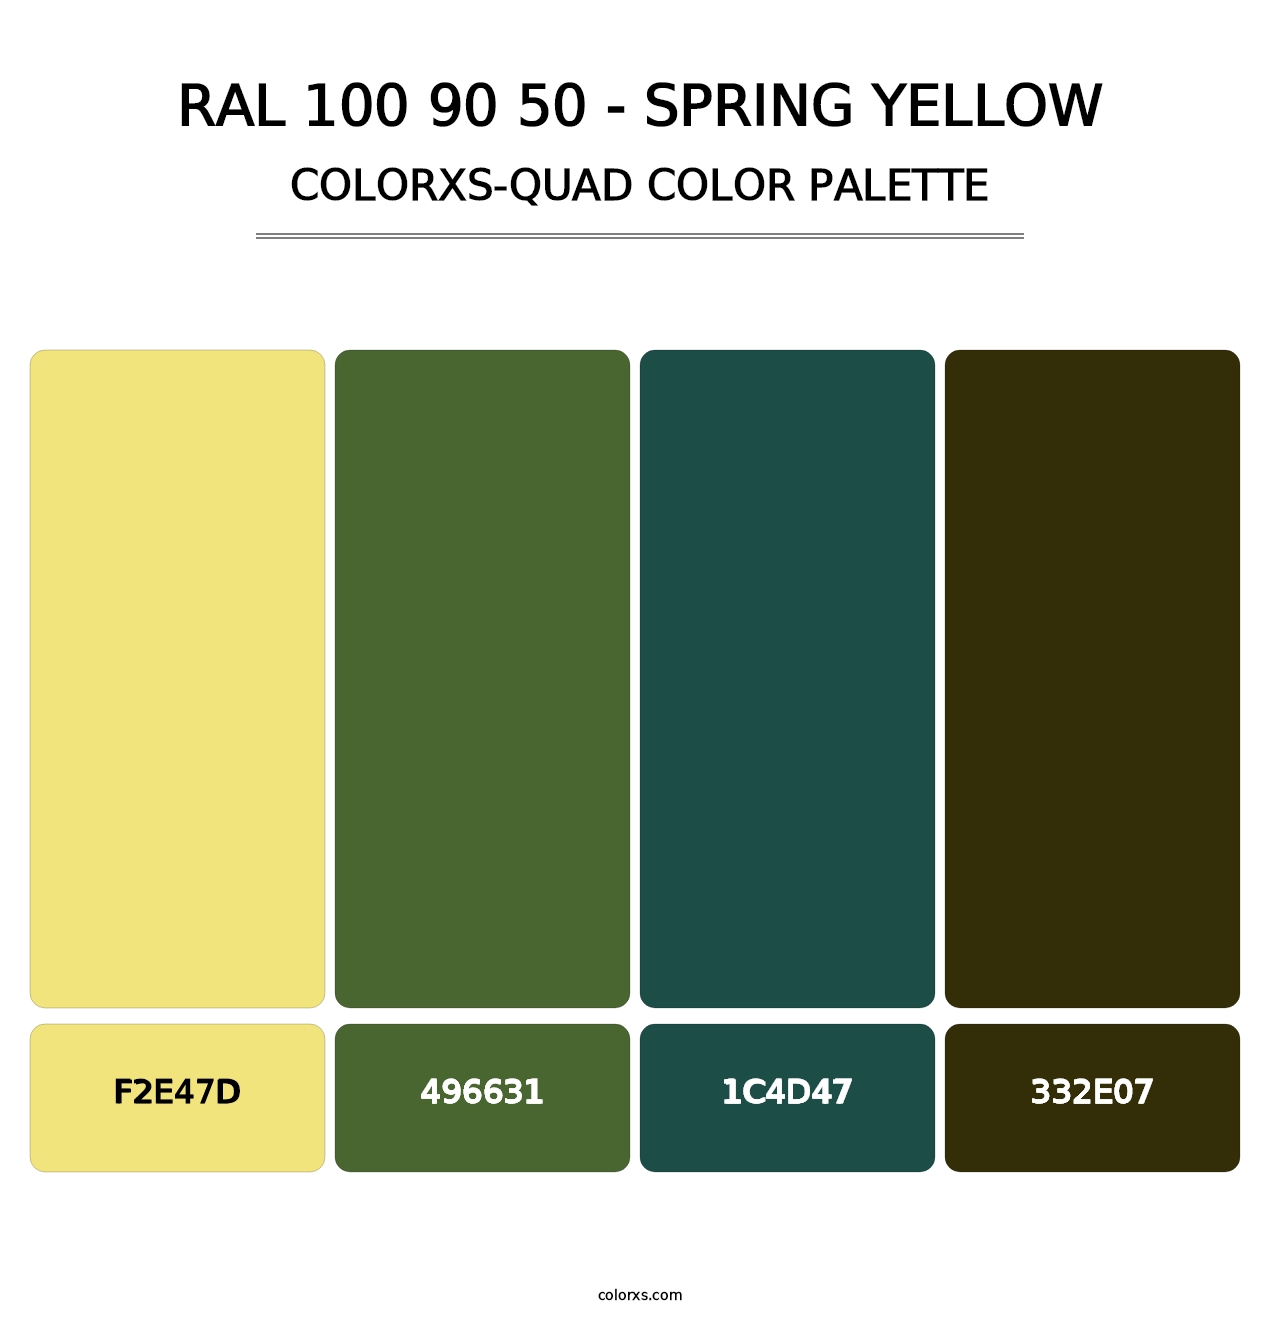 RAL 100 90 50 - Spring Yellow - Colorxs Quad Palette